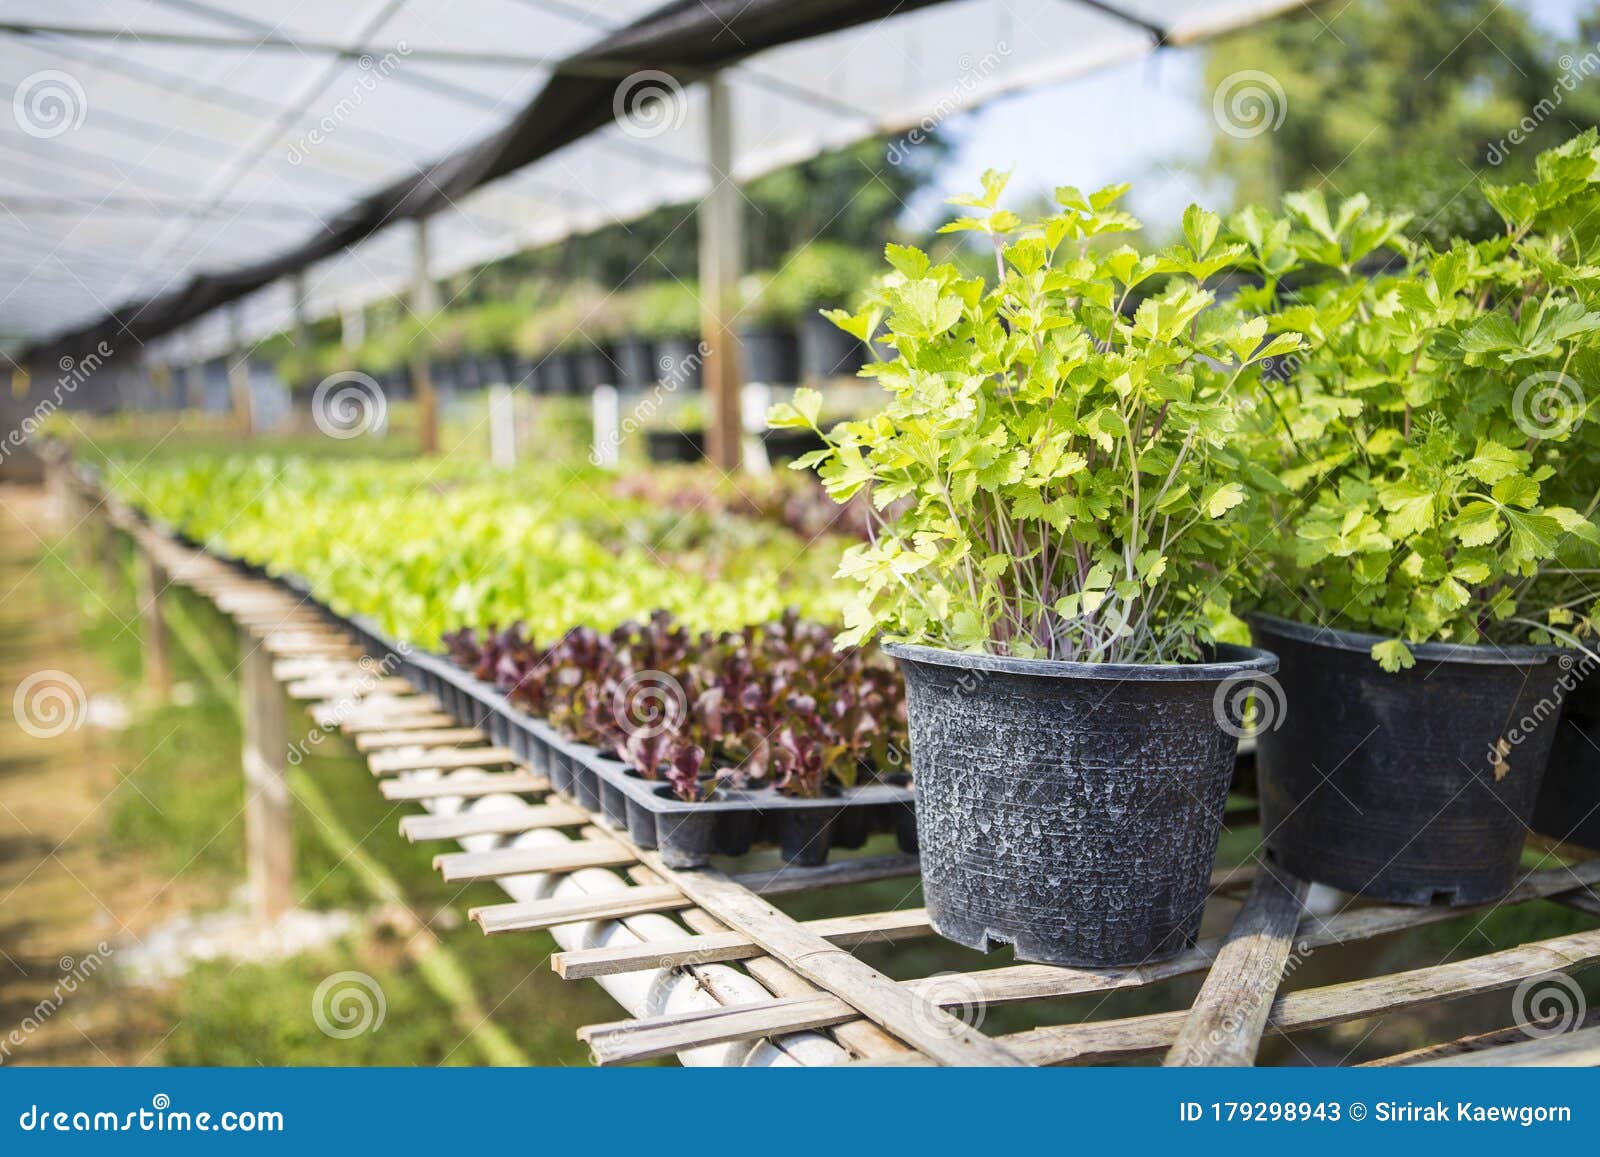 Plant Nursery Green Organic Farming in North of Thailand Stock Image - Image of ingredient, food: 179298943